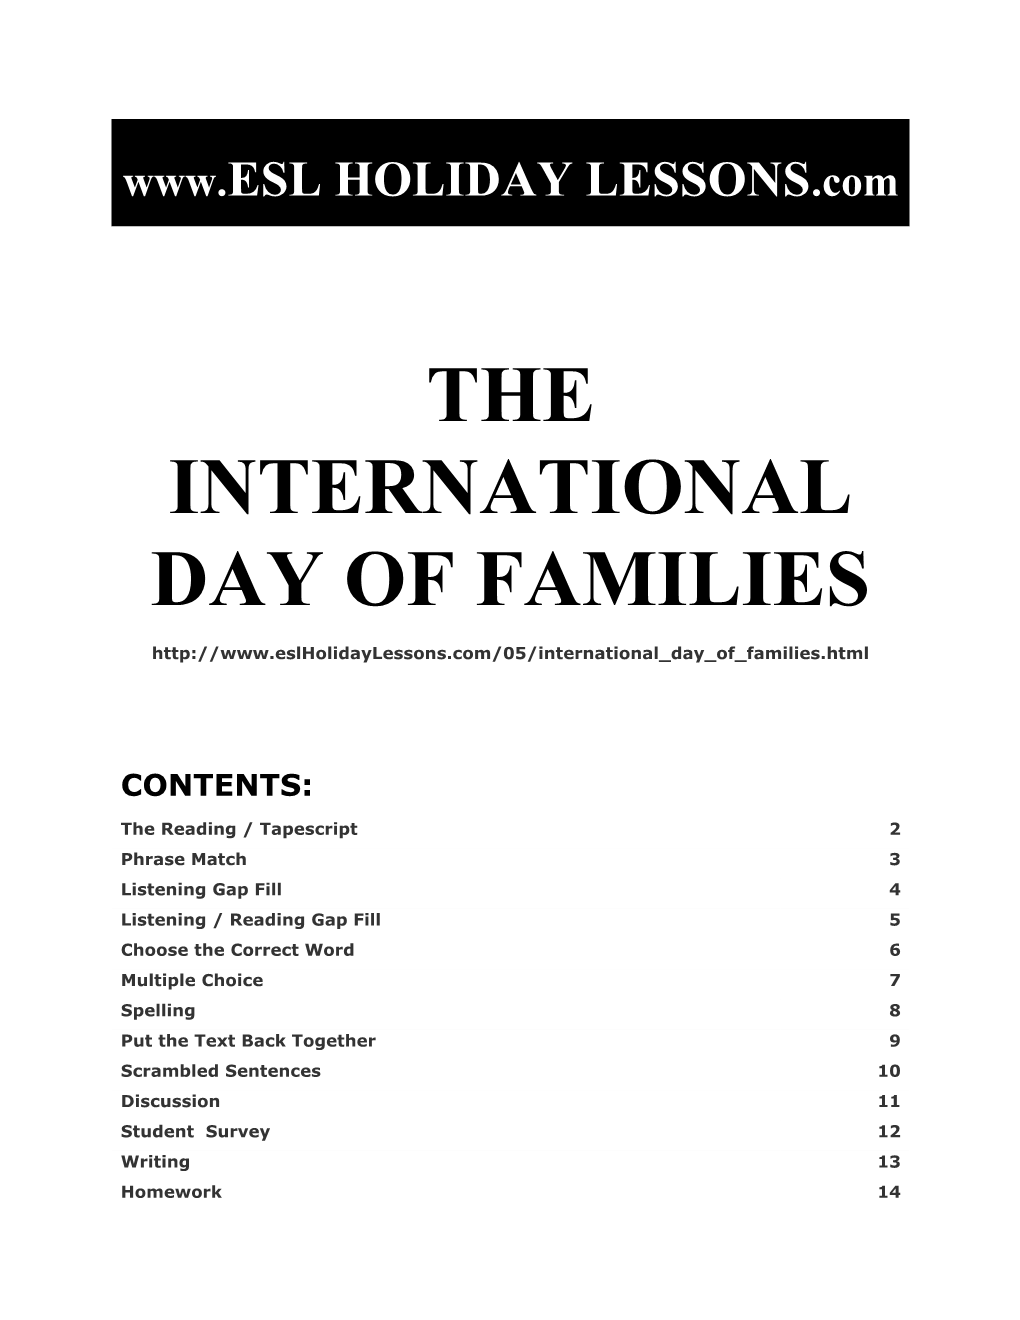 Holiday Lessons - International Day of Families